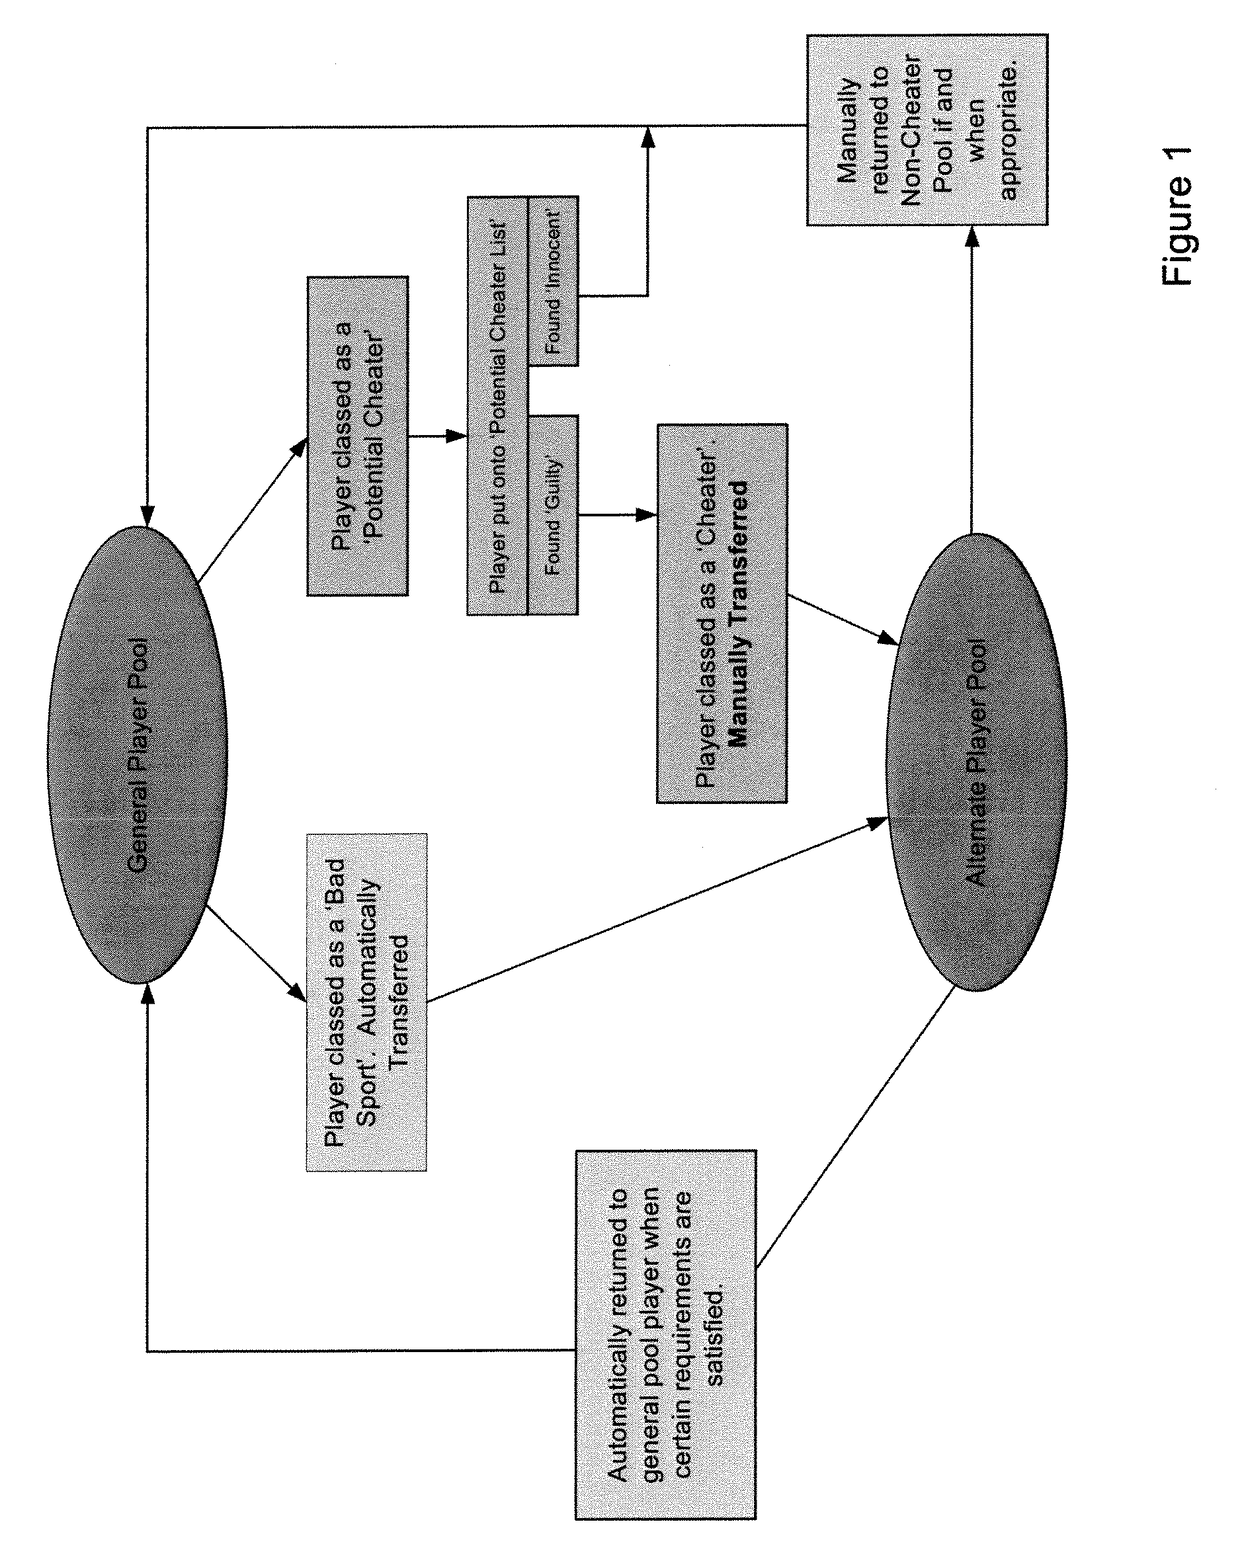 System and method for online community management